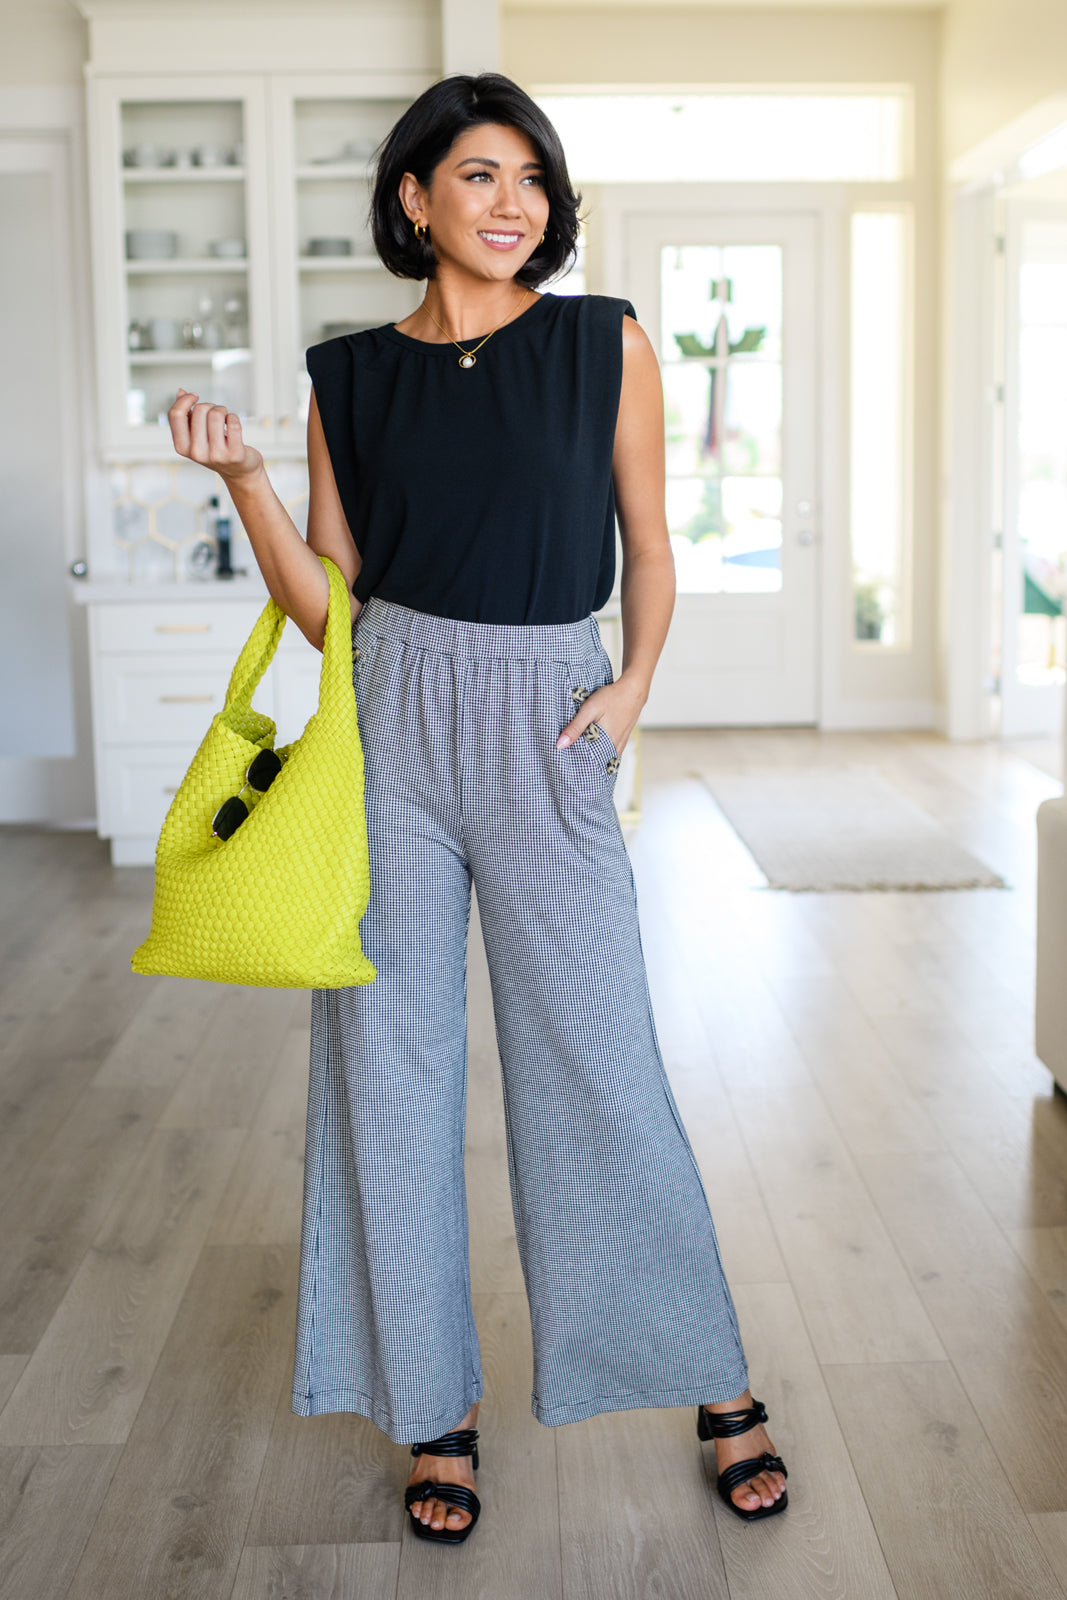 Woven and Worn Tote and Clutch in Citron